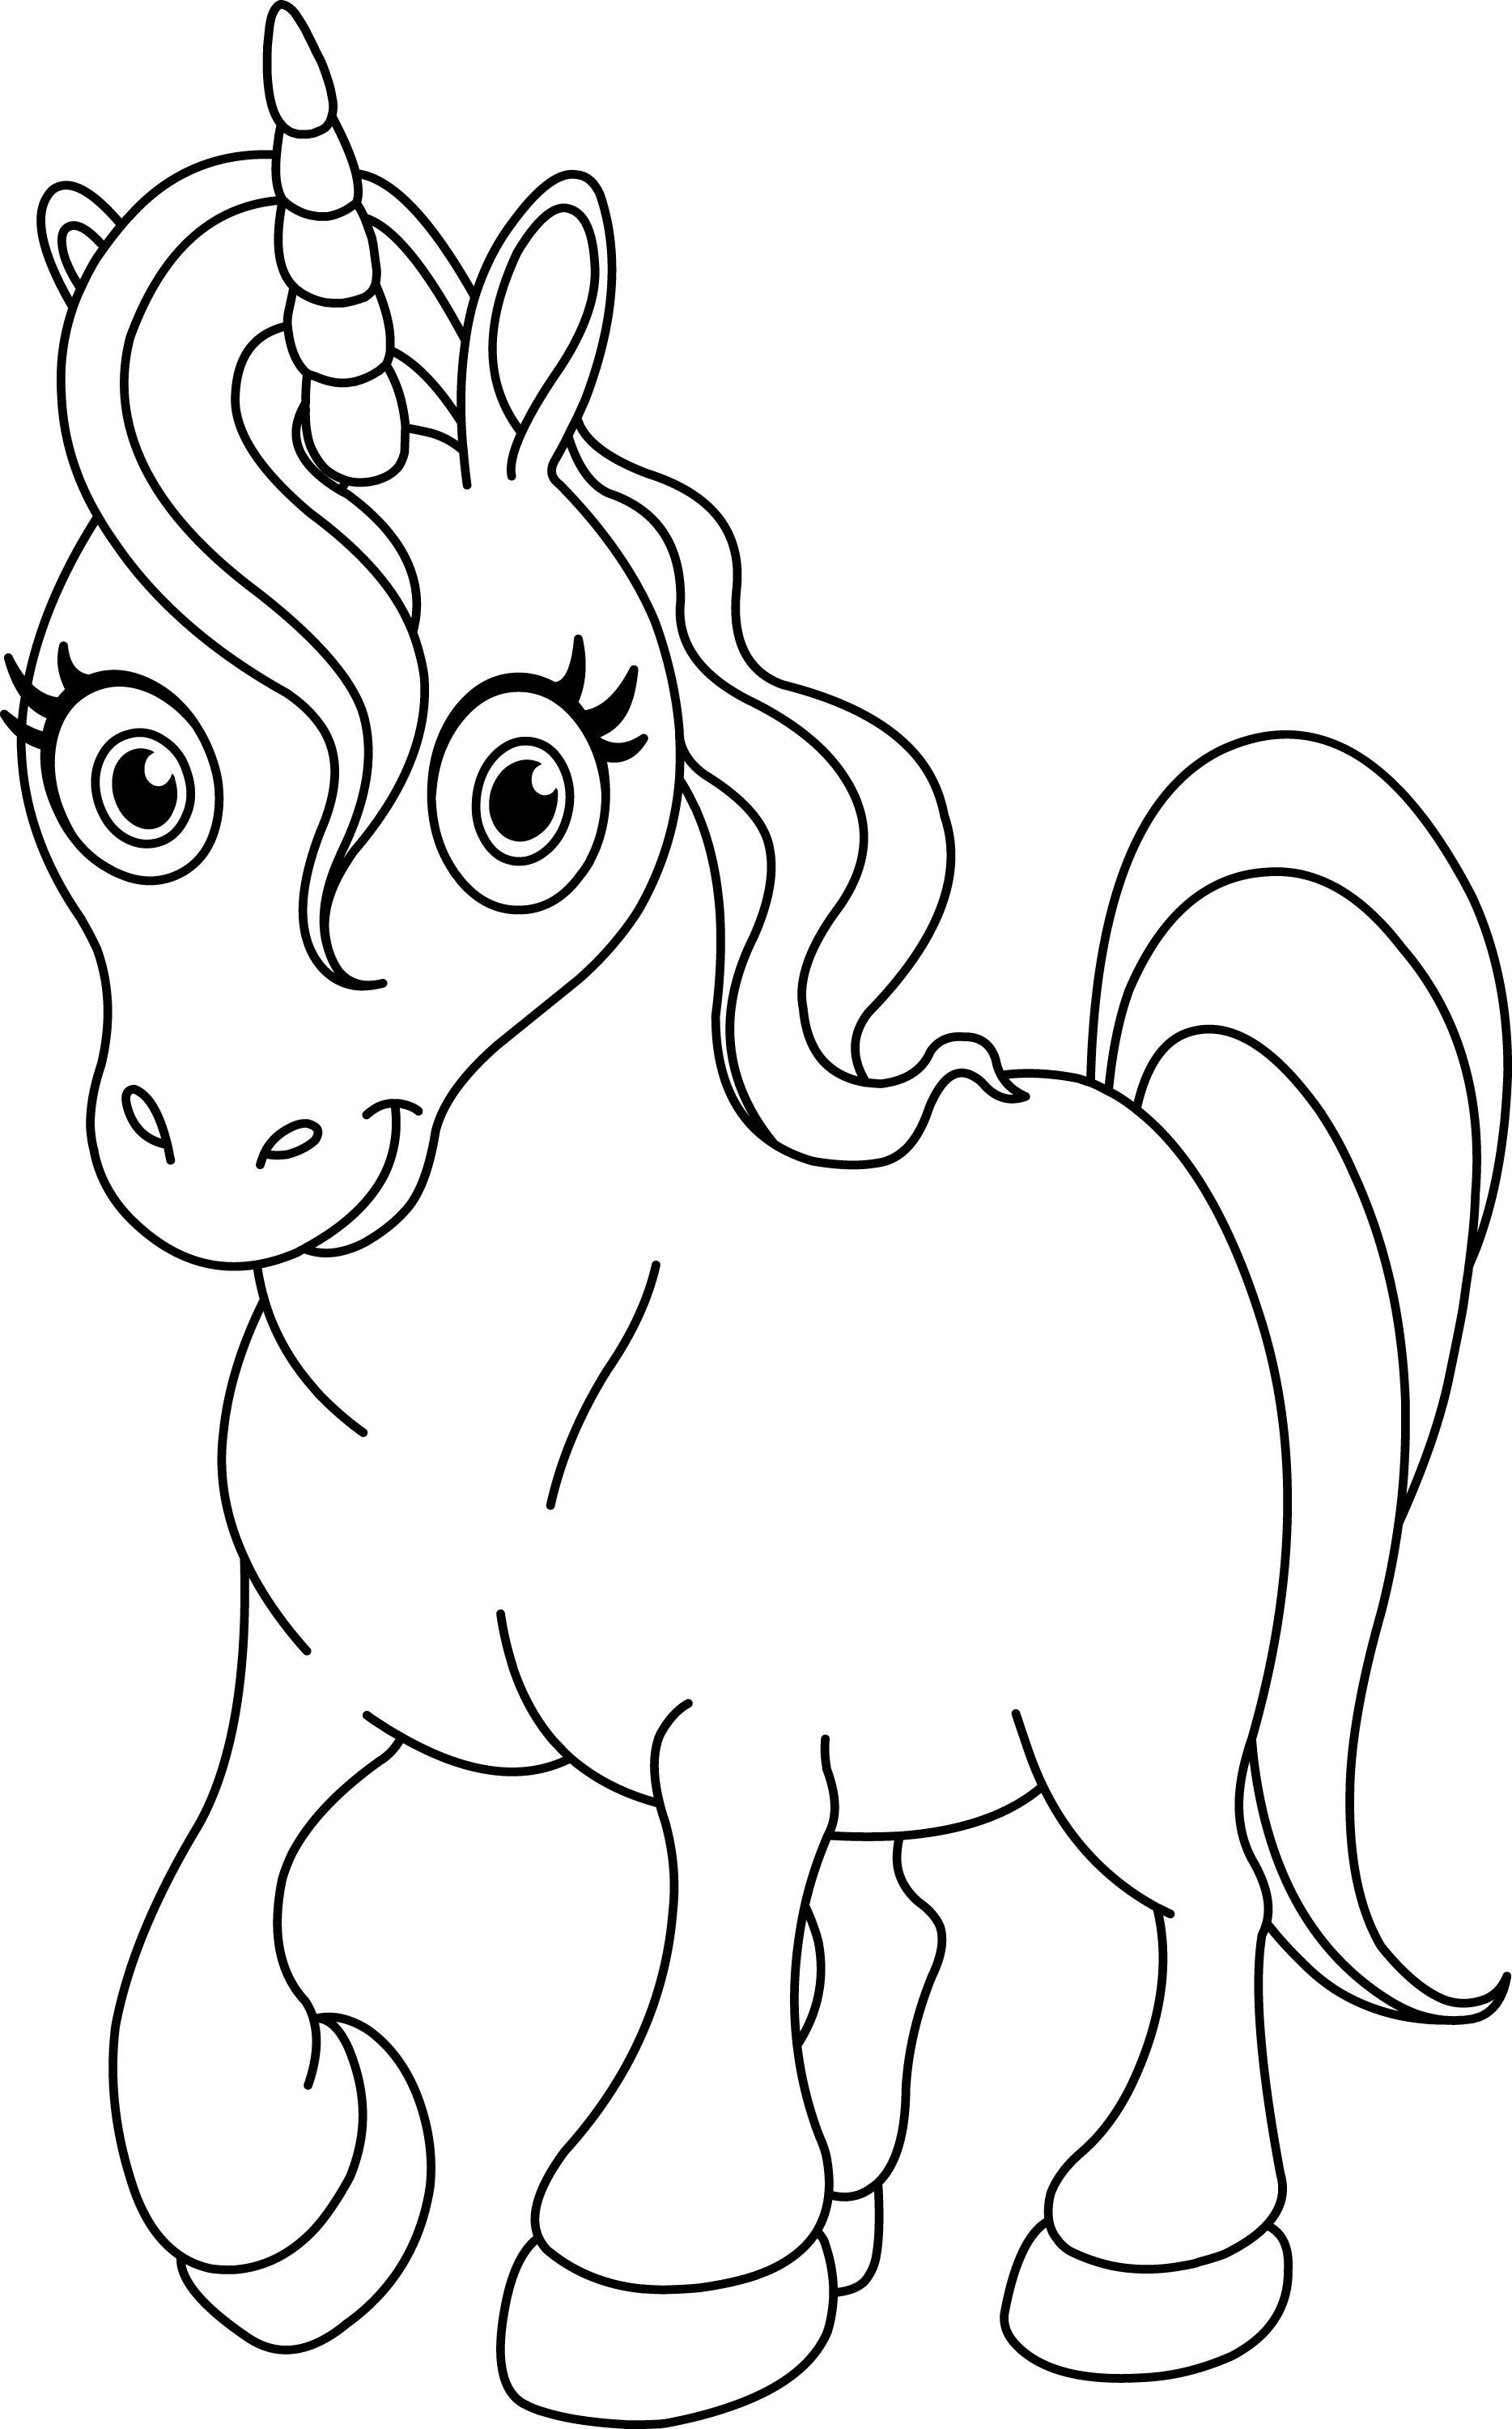 Coloring Pages For Girls Unicorns
 Pay attention for this explanation to do the Unicorn